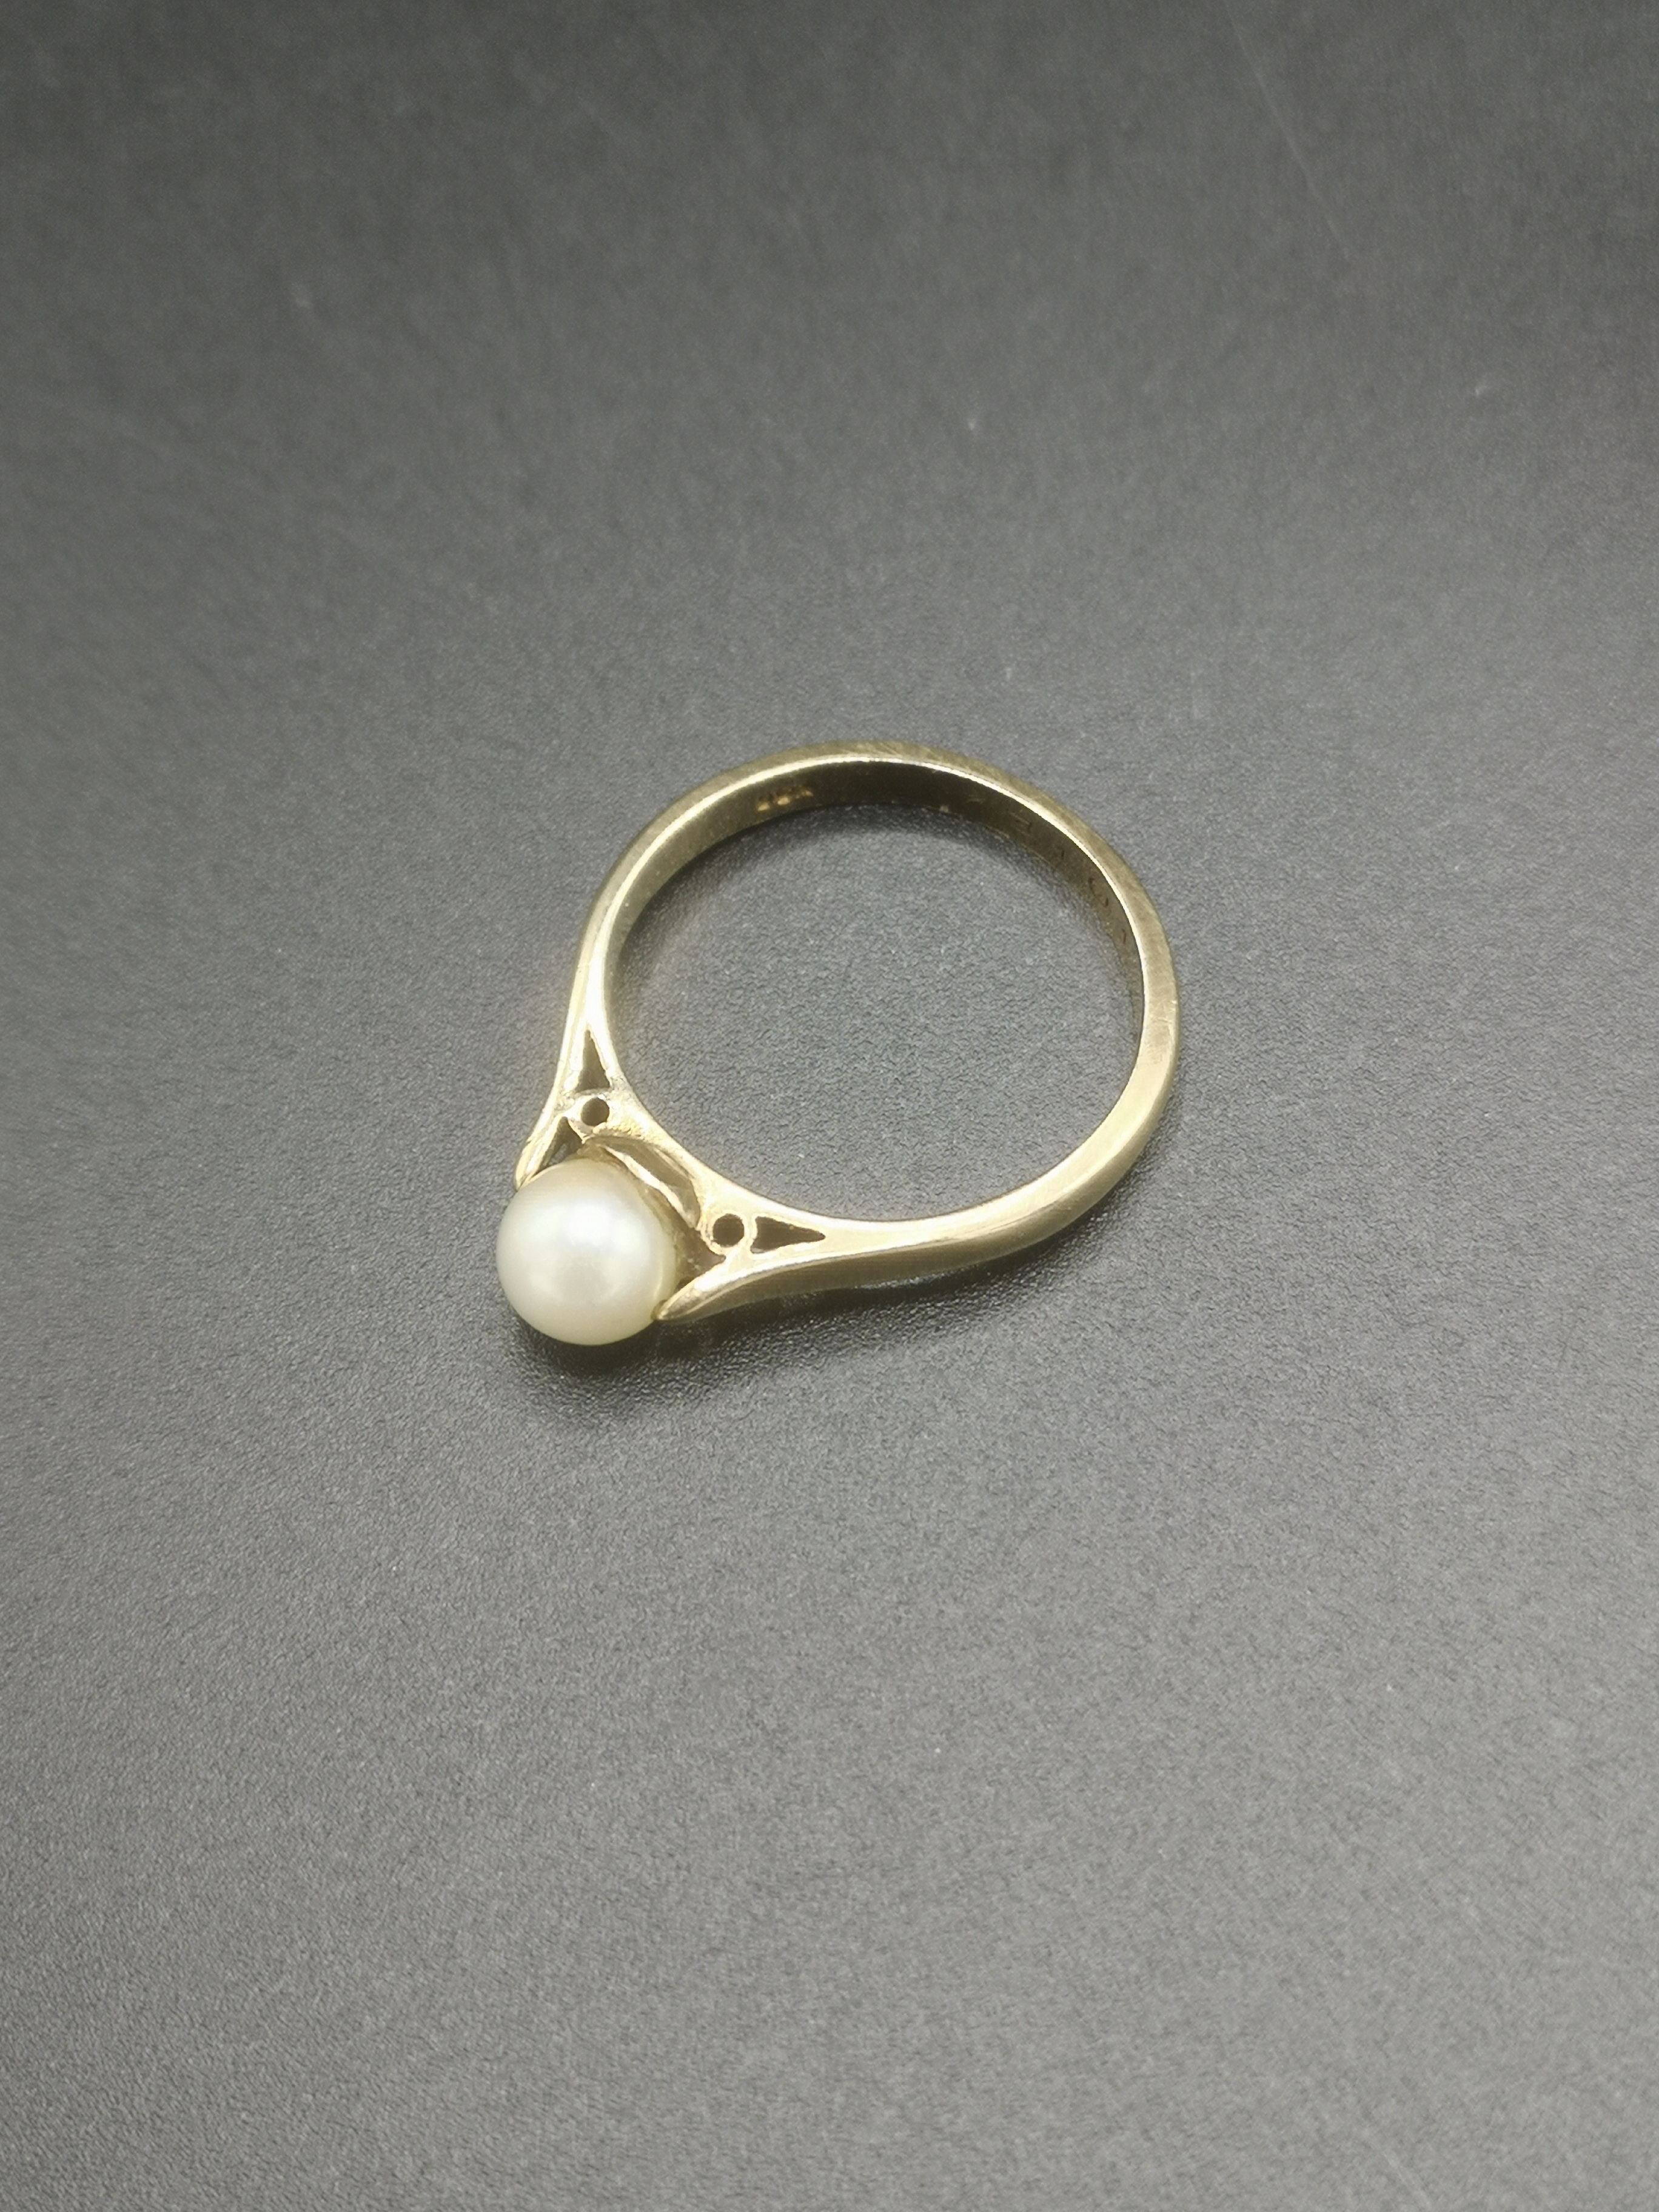 9ct gold and pearl ring together with a 9ct gold and pearl brooch - Image 5 of 7